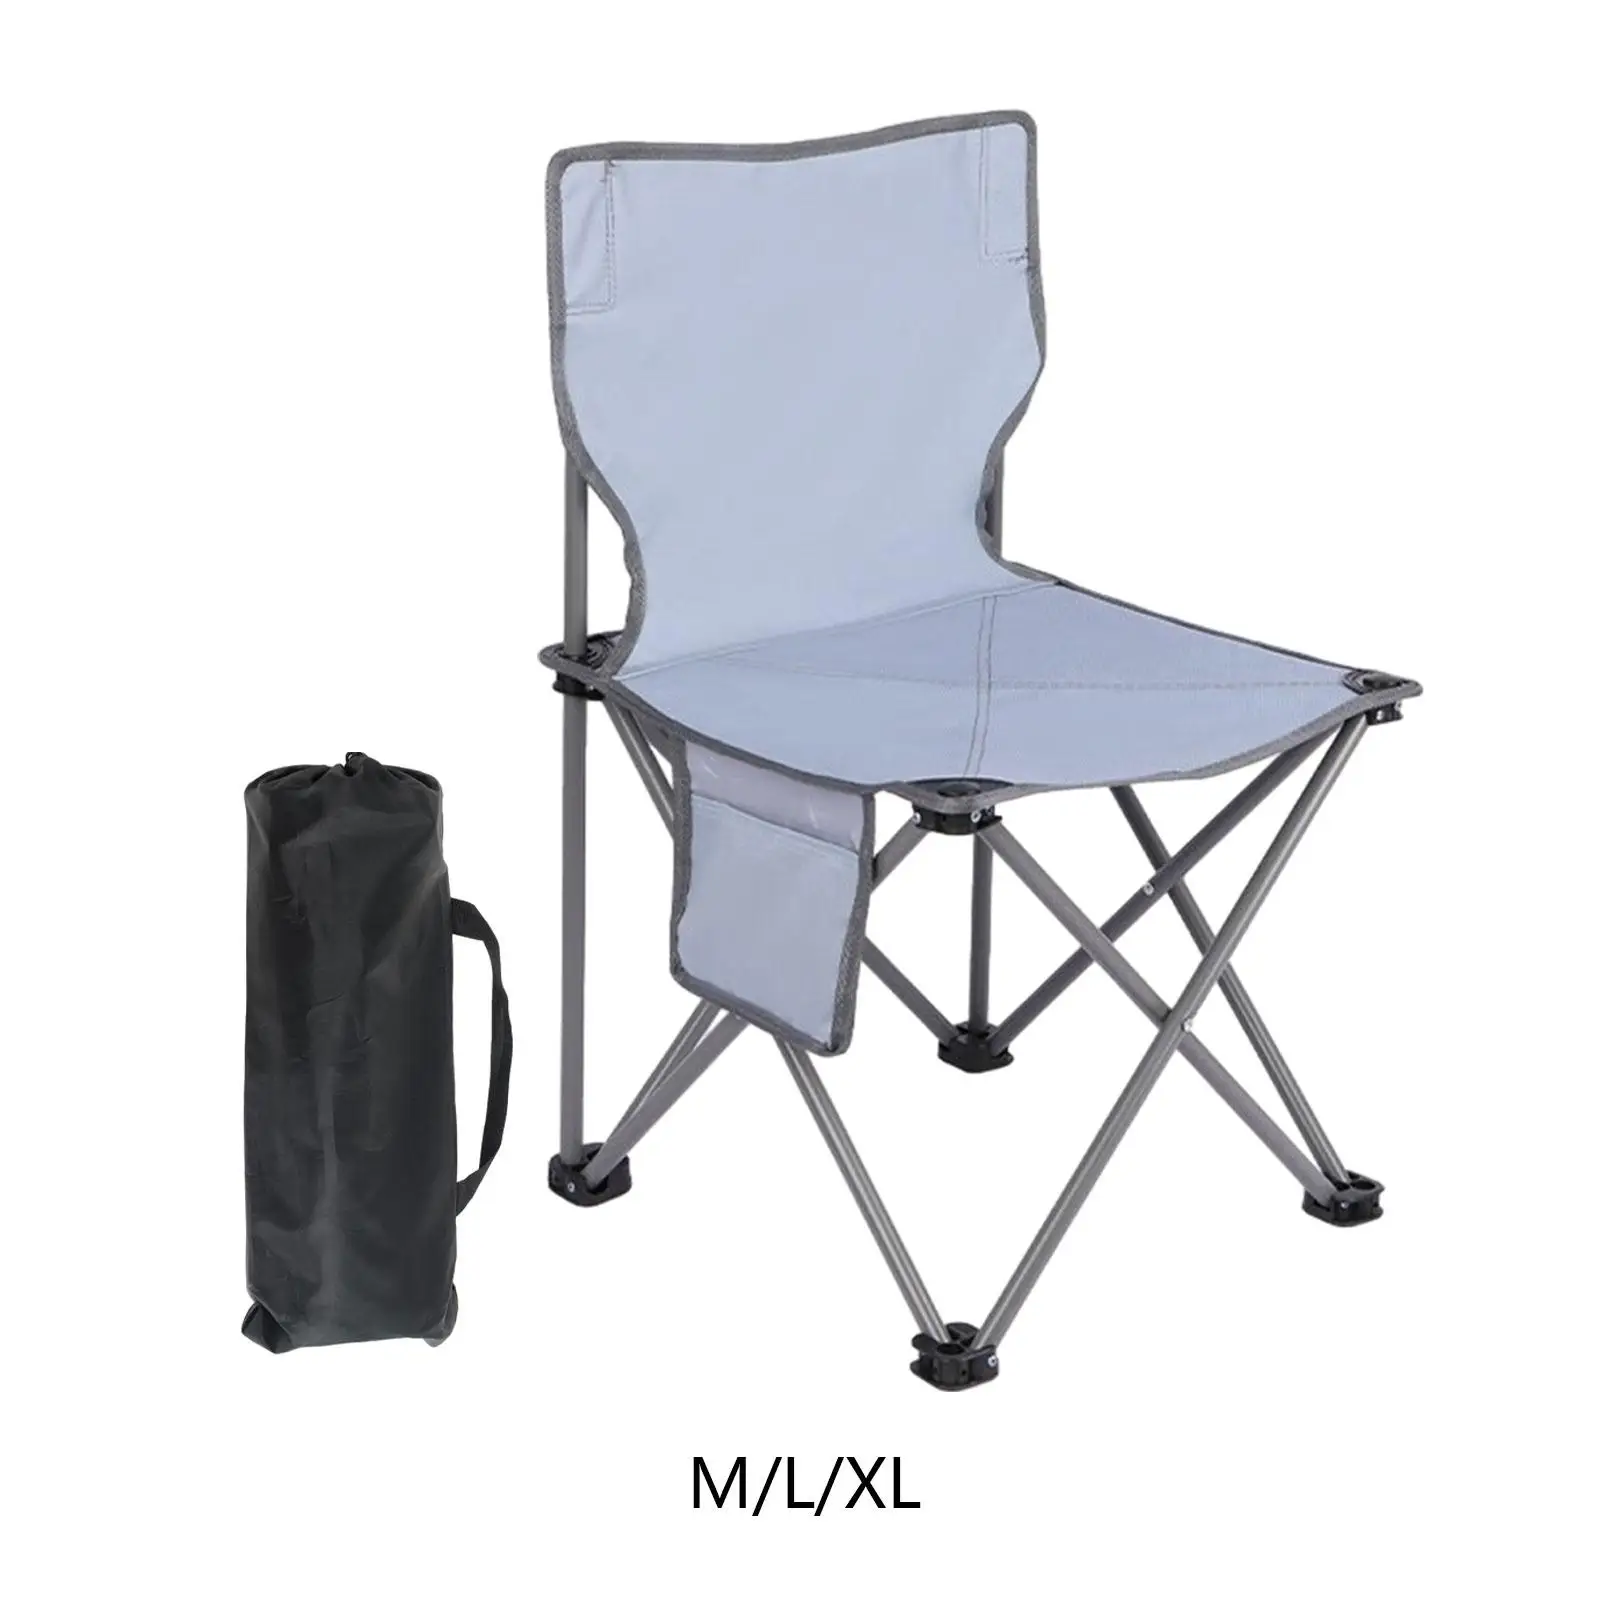 Portable Camping Chair Collapsible Chair Heavy Duty High Back Fishing Chair Folding Chair for Lawn Beach Patio Picnic Garden